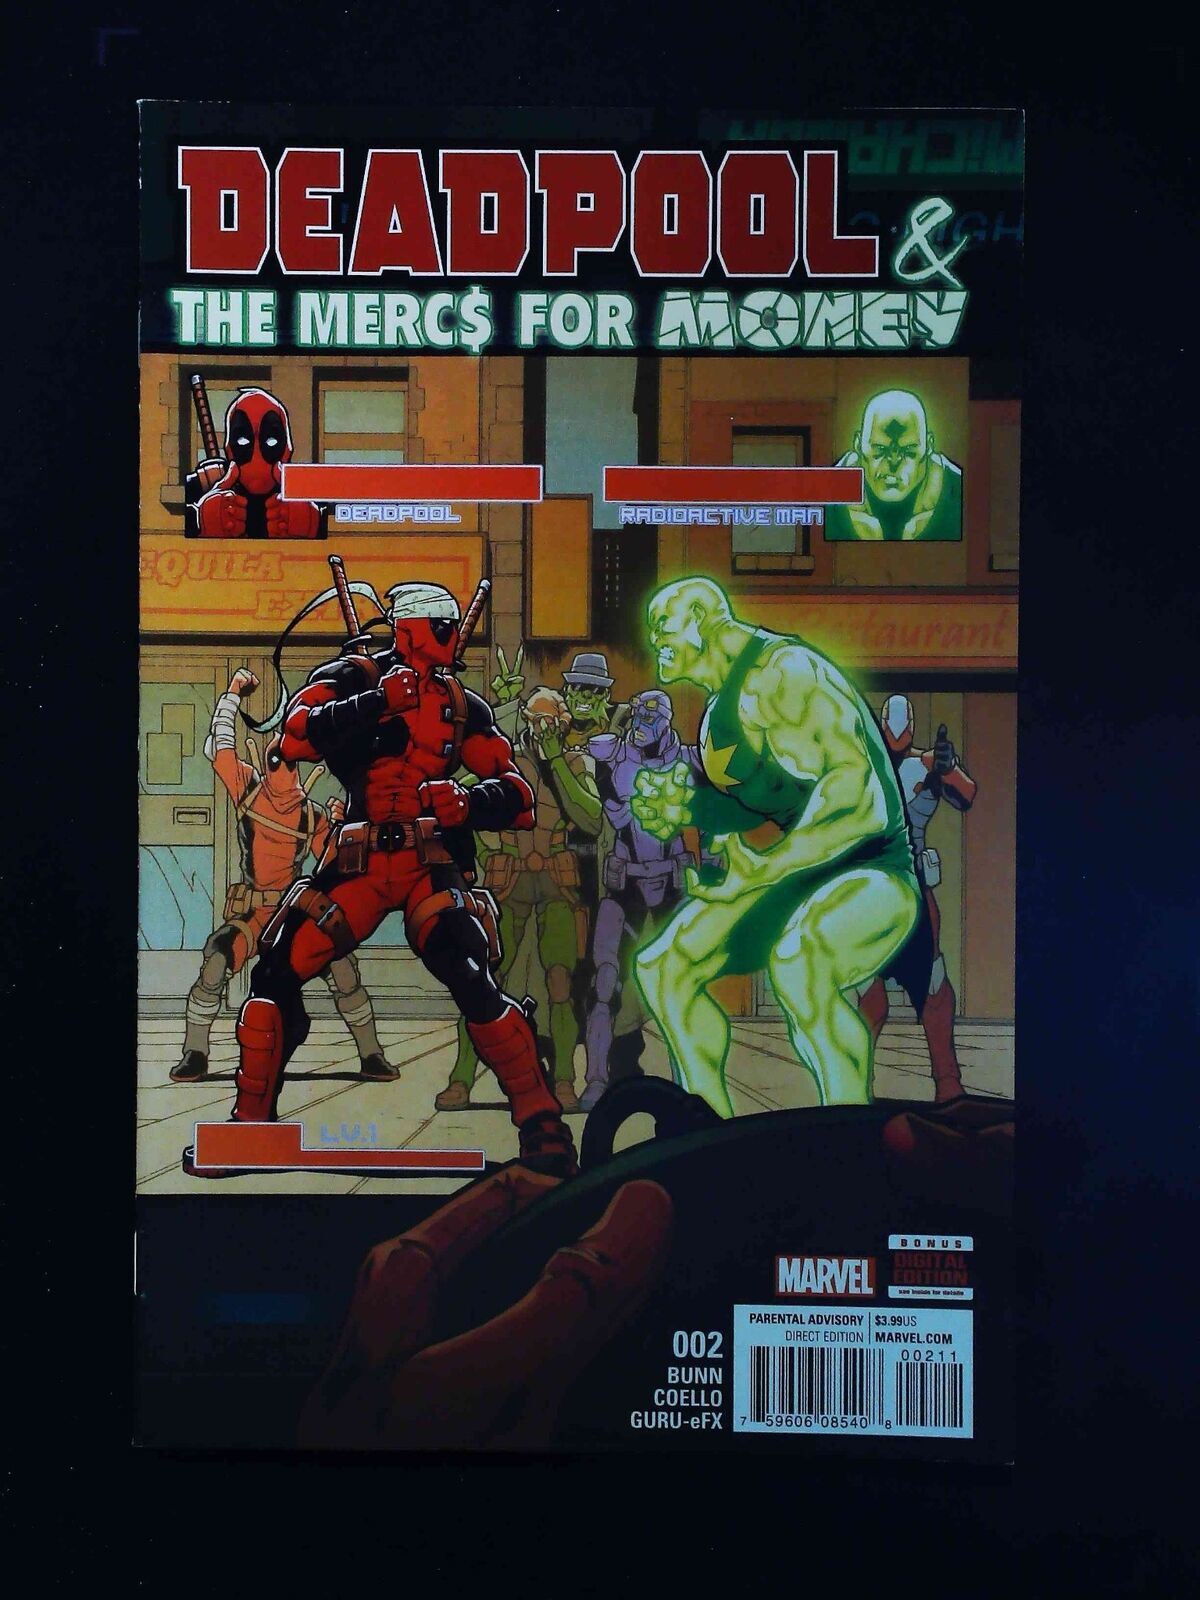 Deadpool And The Mercs For Money #2 (2Nd Series) Marvel Comics 2016 Vf+